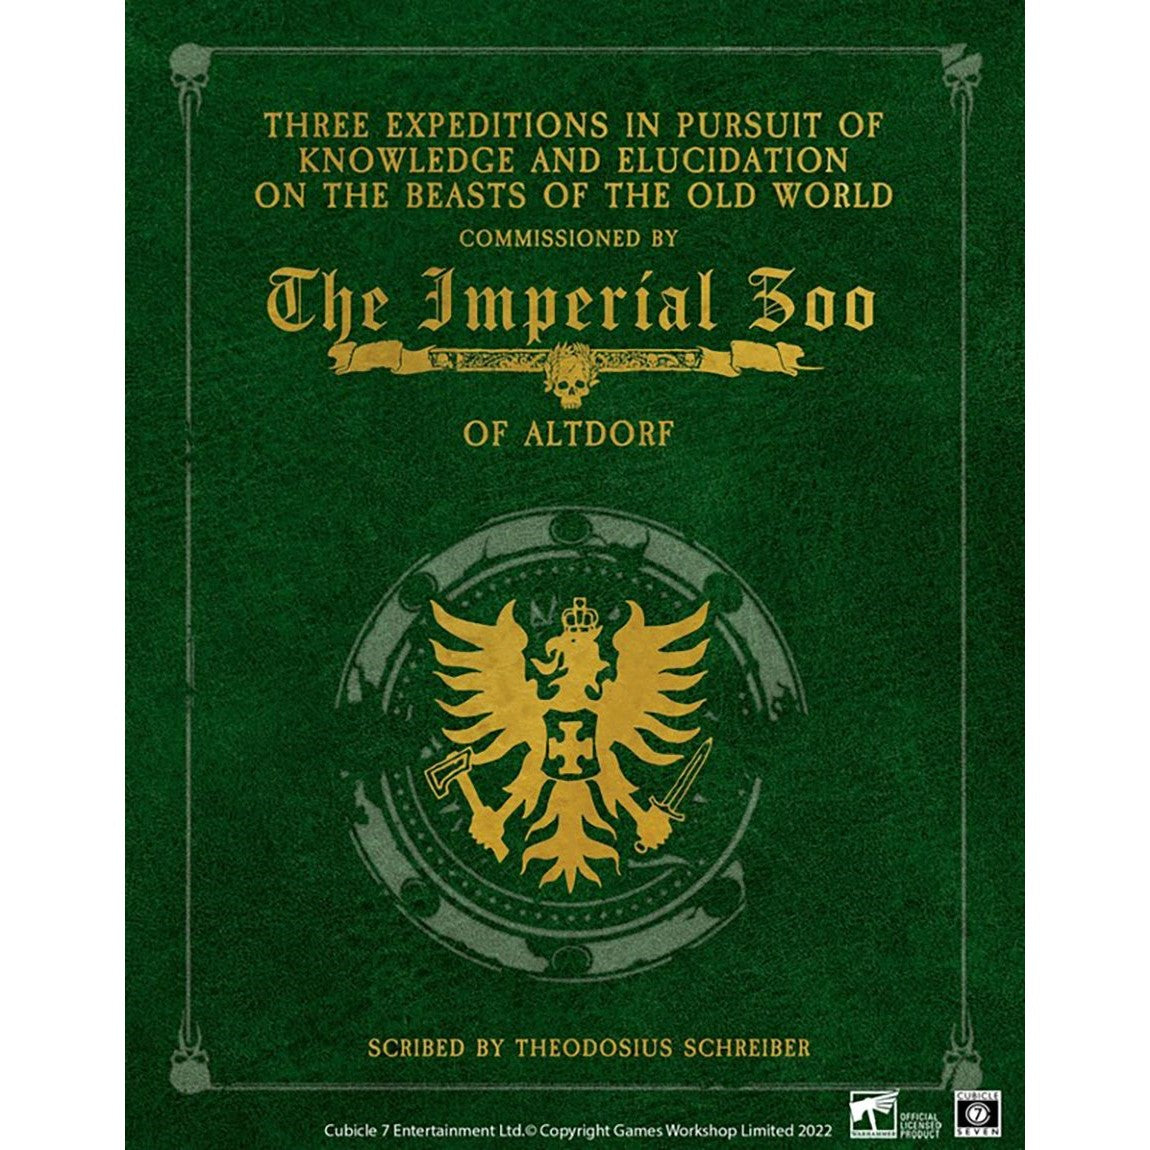 Warhammer Fantasy Roleplay - The Imperial Zoo Collectors Edition